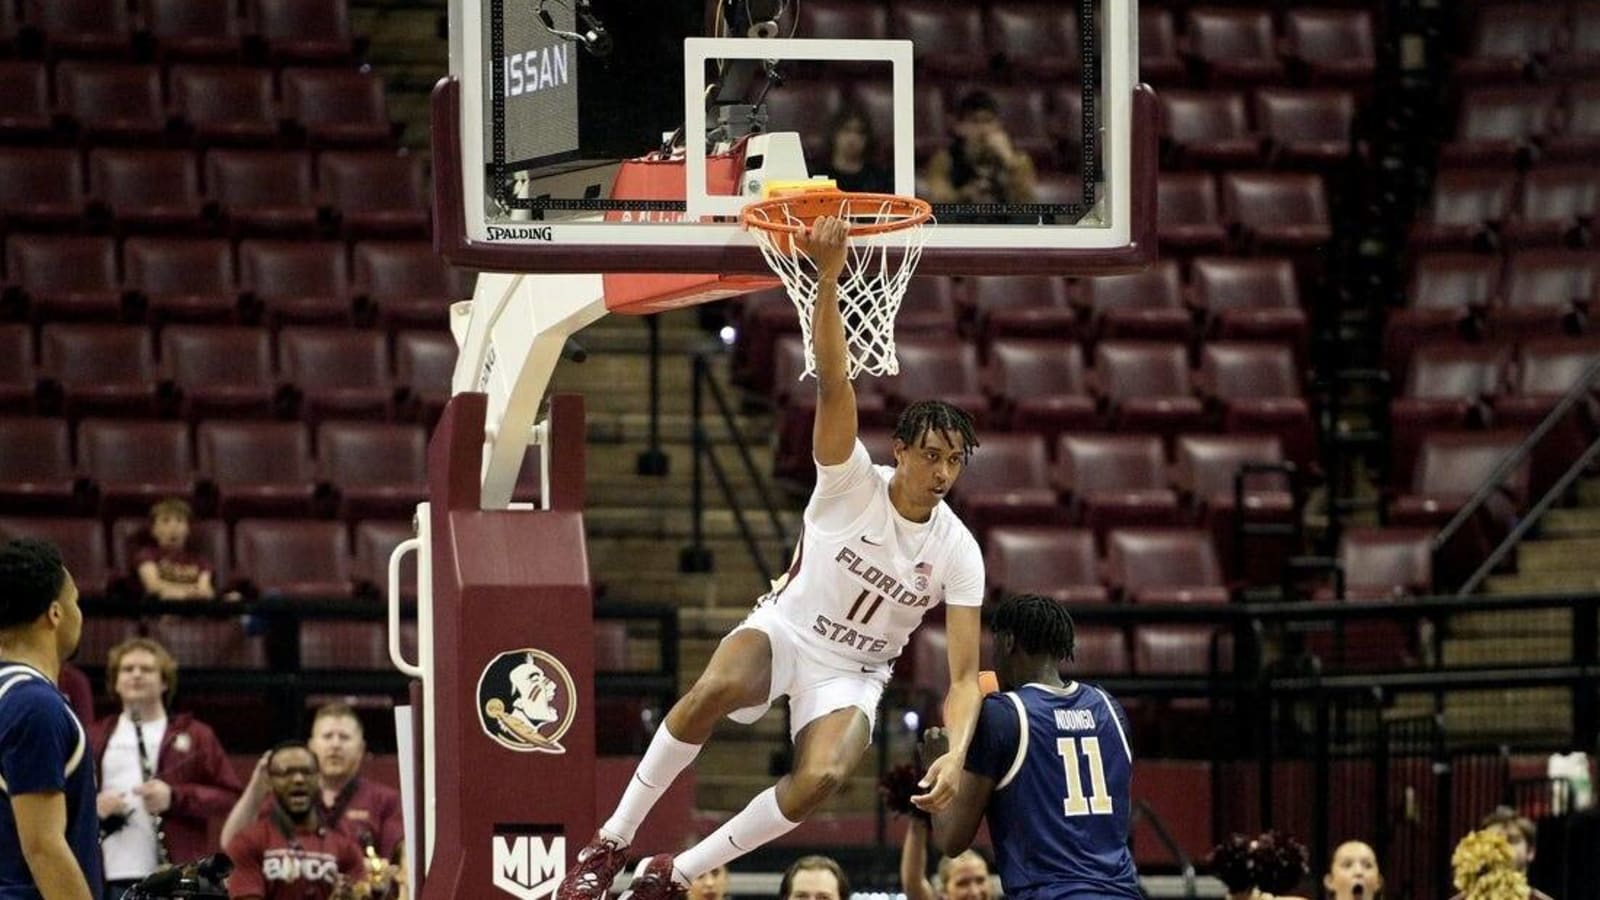 Florida State holds off Georgia Tech at home